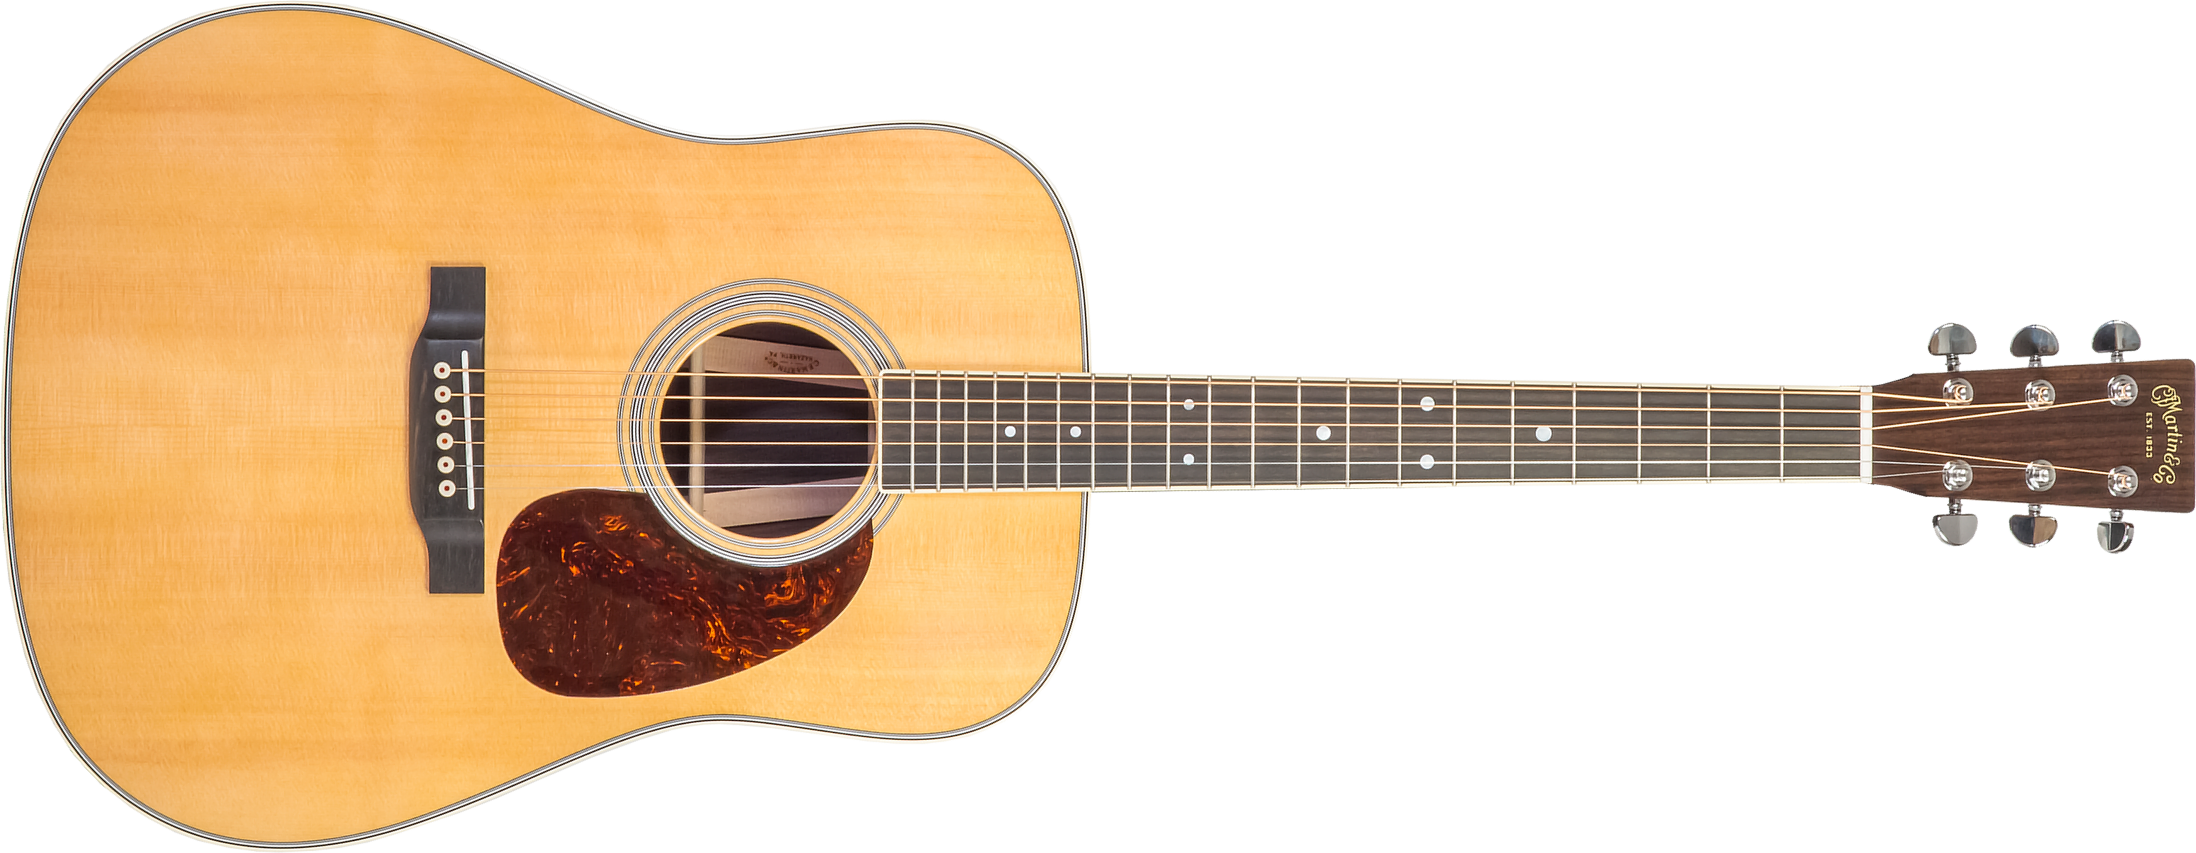 Martin D-35 Standard Re-imagined Dreadnought Epicea Palissandre Eb - Natural Aging Toner - Acoustic guitar & electro - Main picture